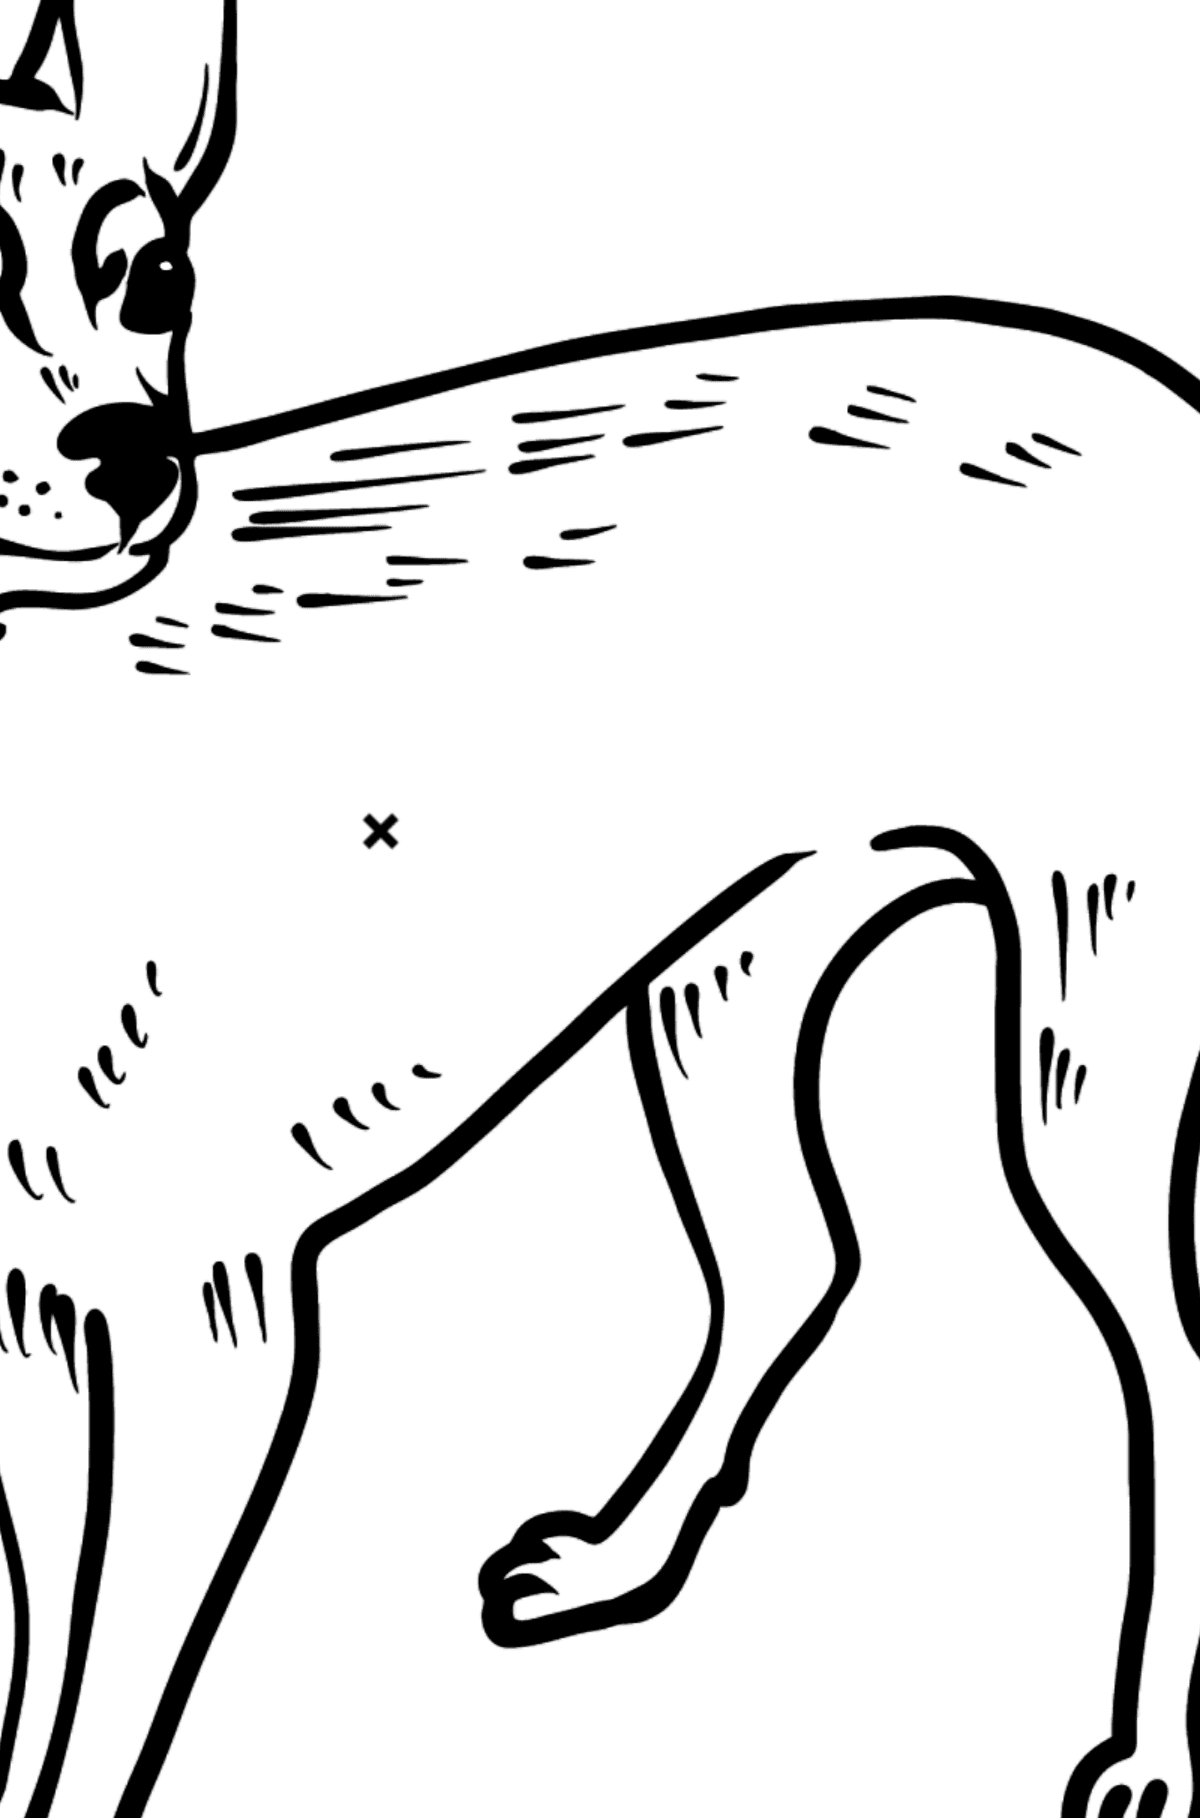 Dog coloring page - Coloring by Symbols for Kids